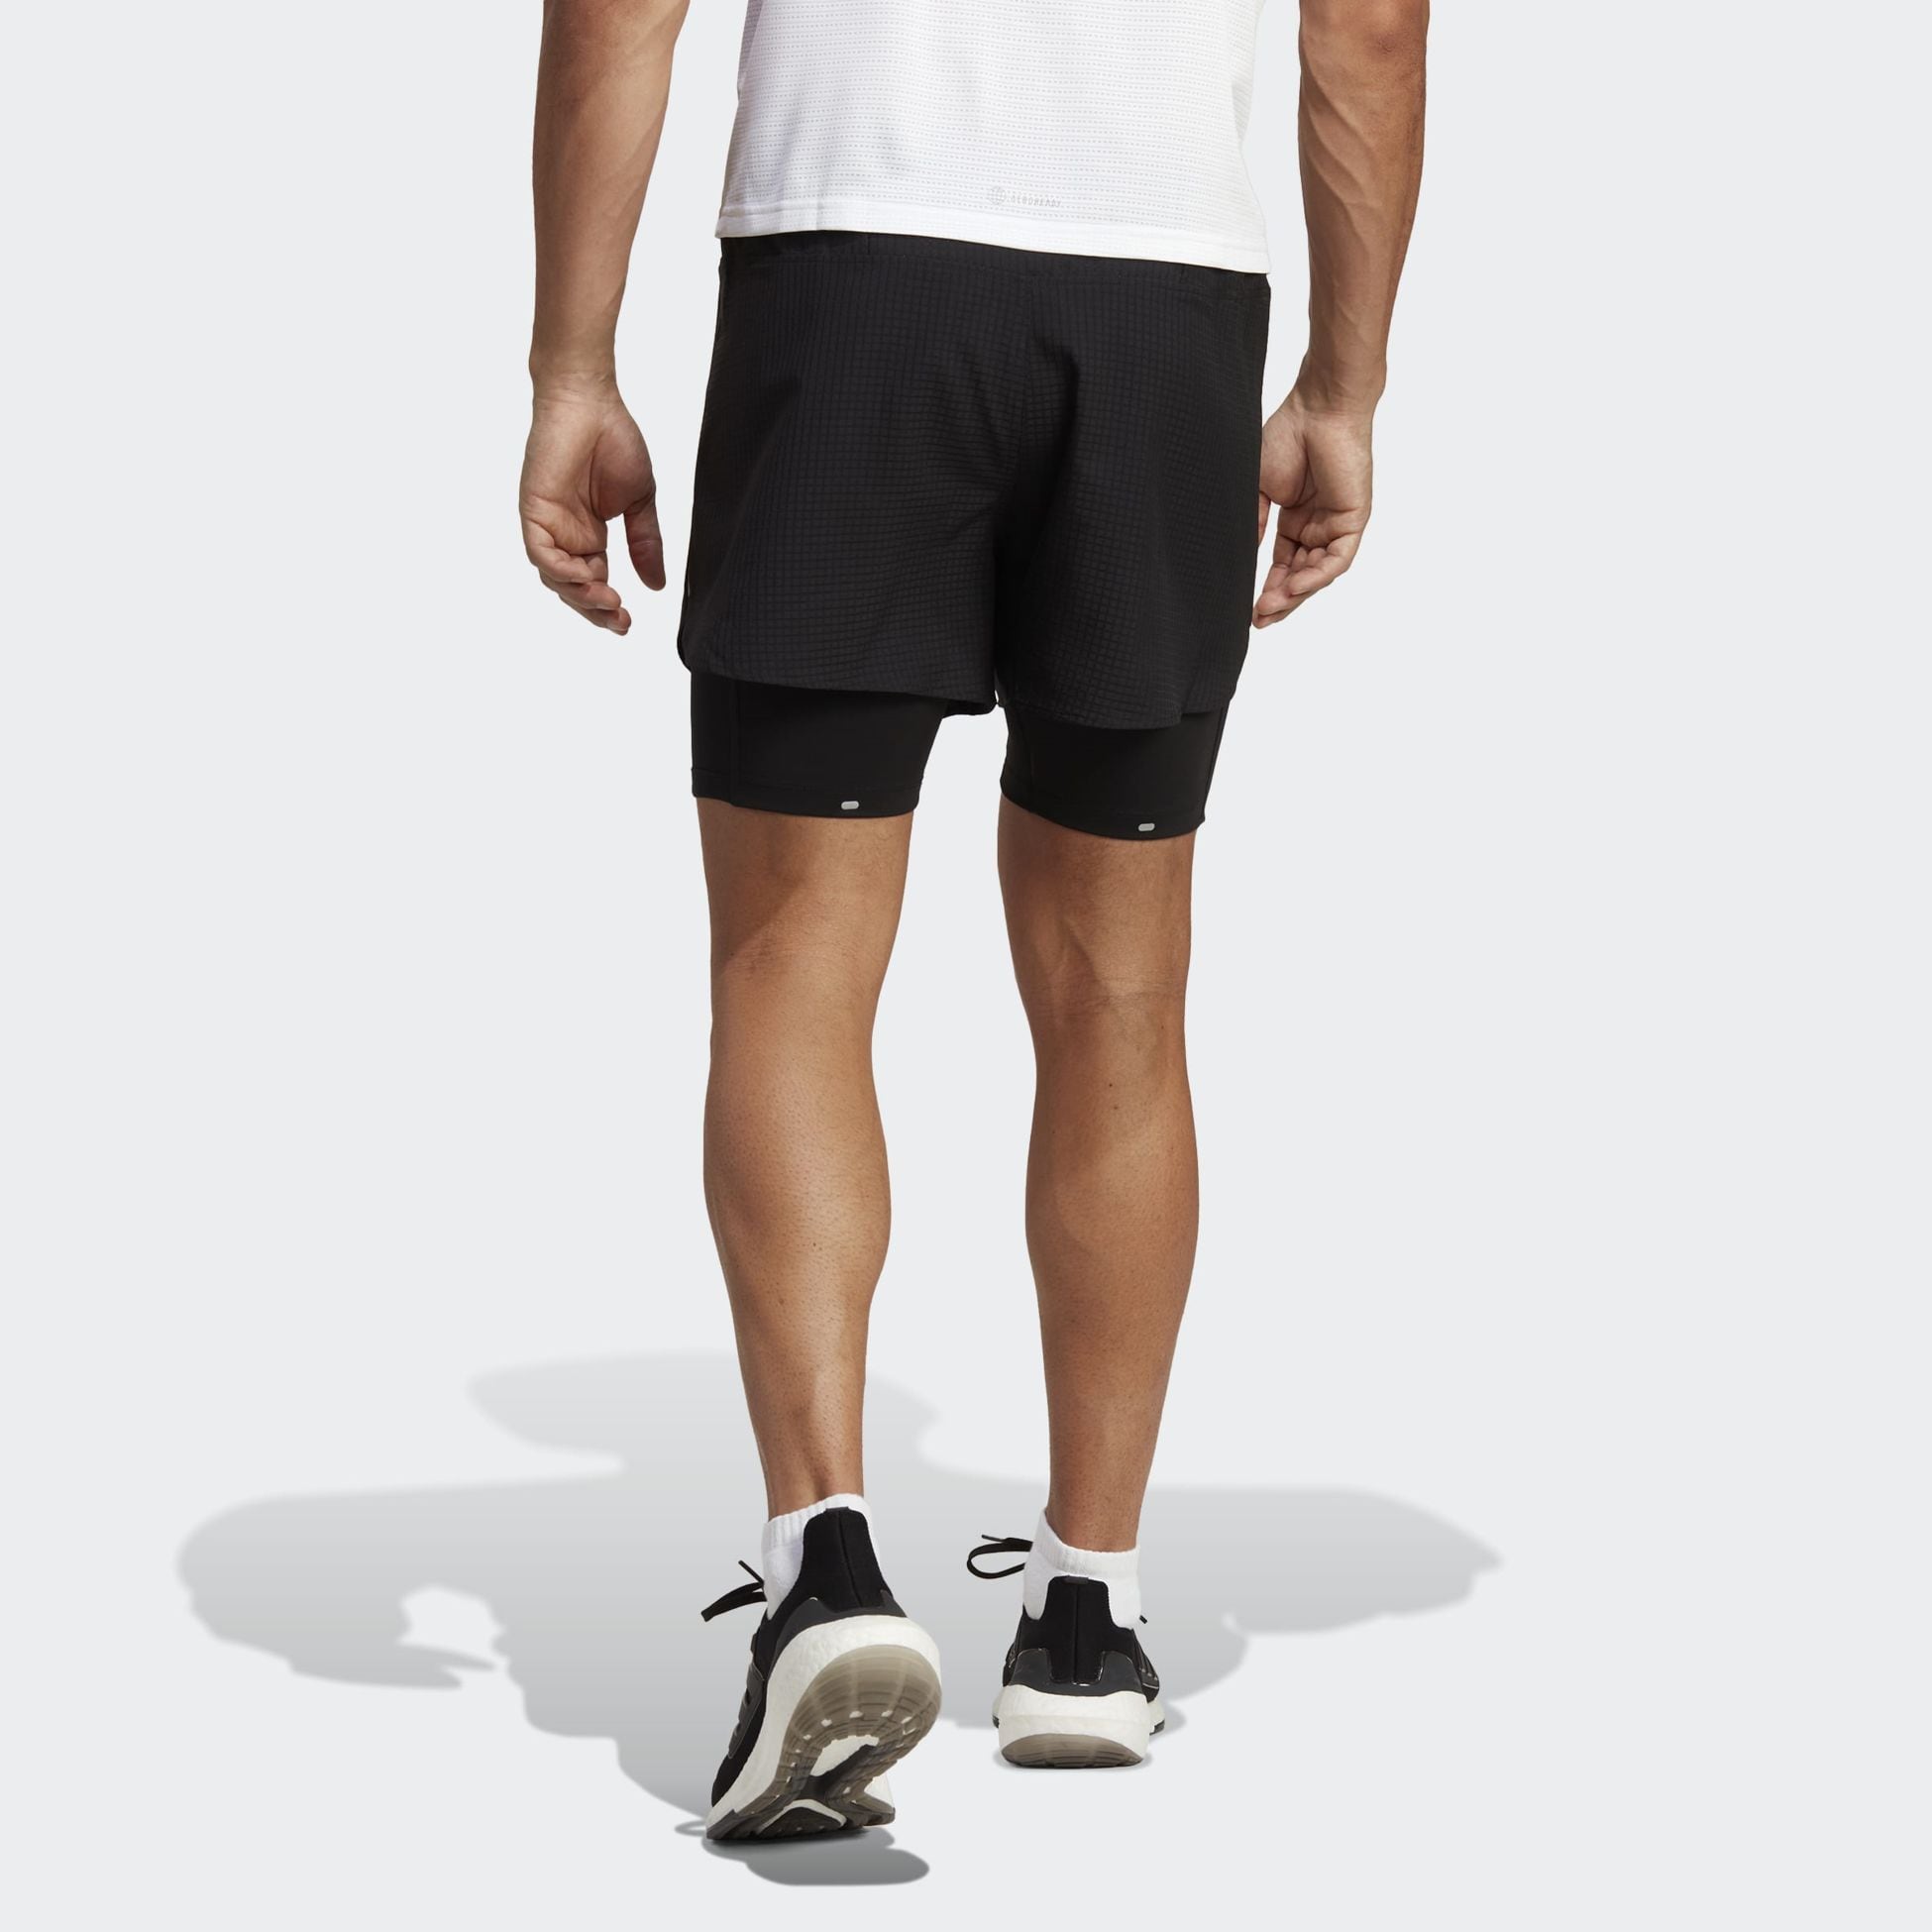 ADIDAS, Designed for Running 2-in-1 Shorts